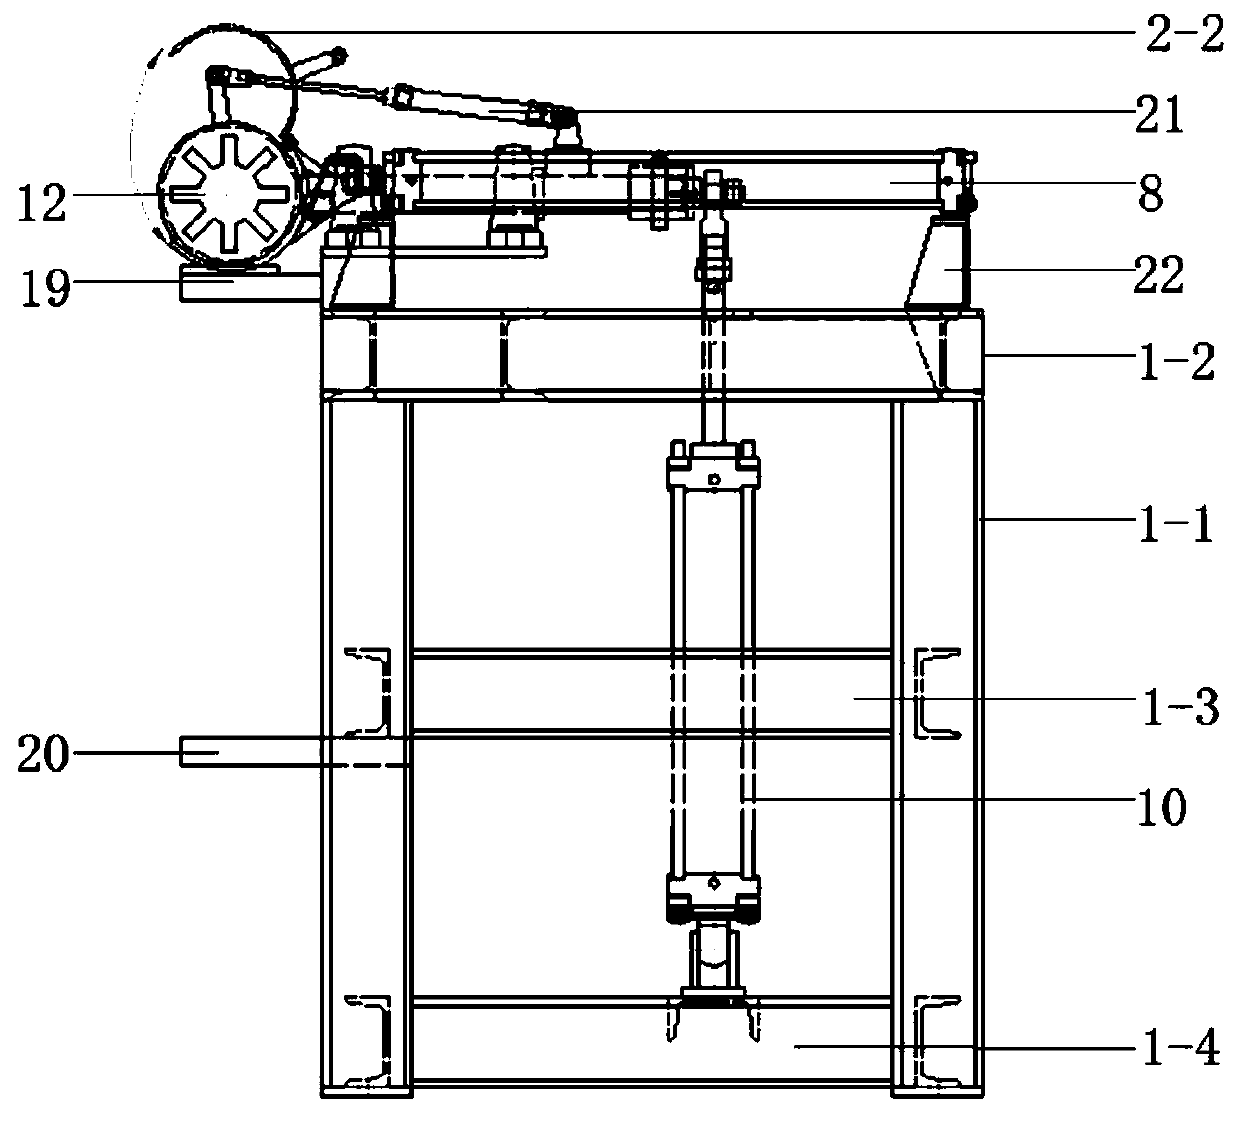 Molybdenum powder rubber rod turning and pouring mechanism